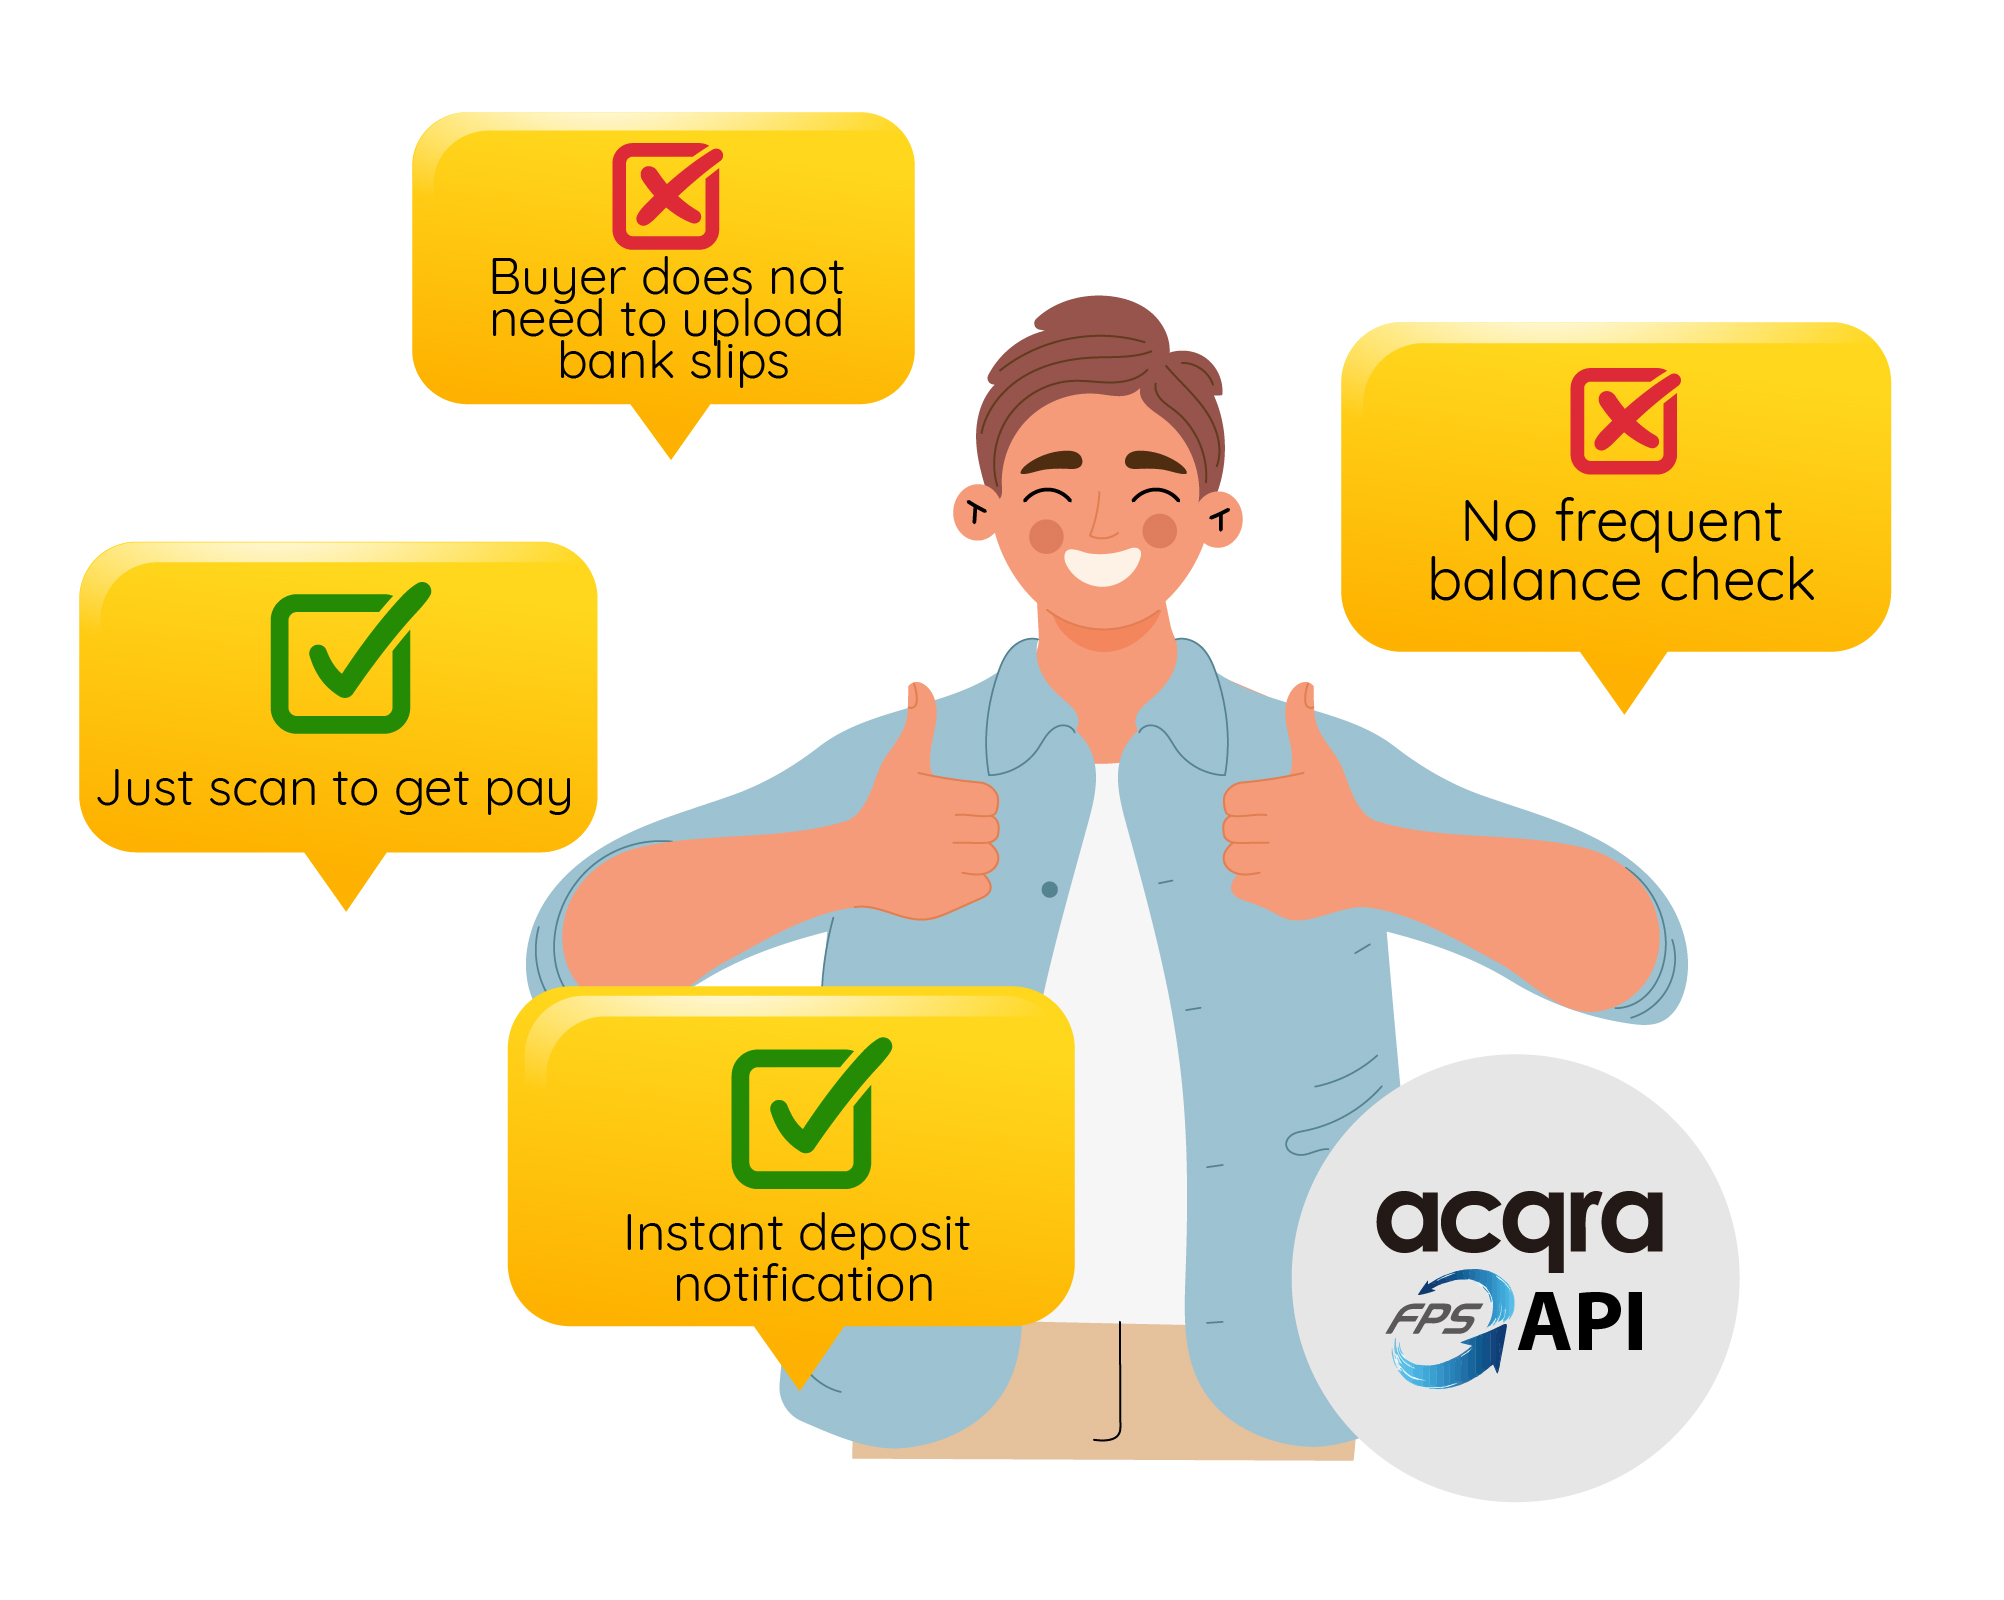 Acqra FPS API system benefit at a glance